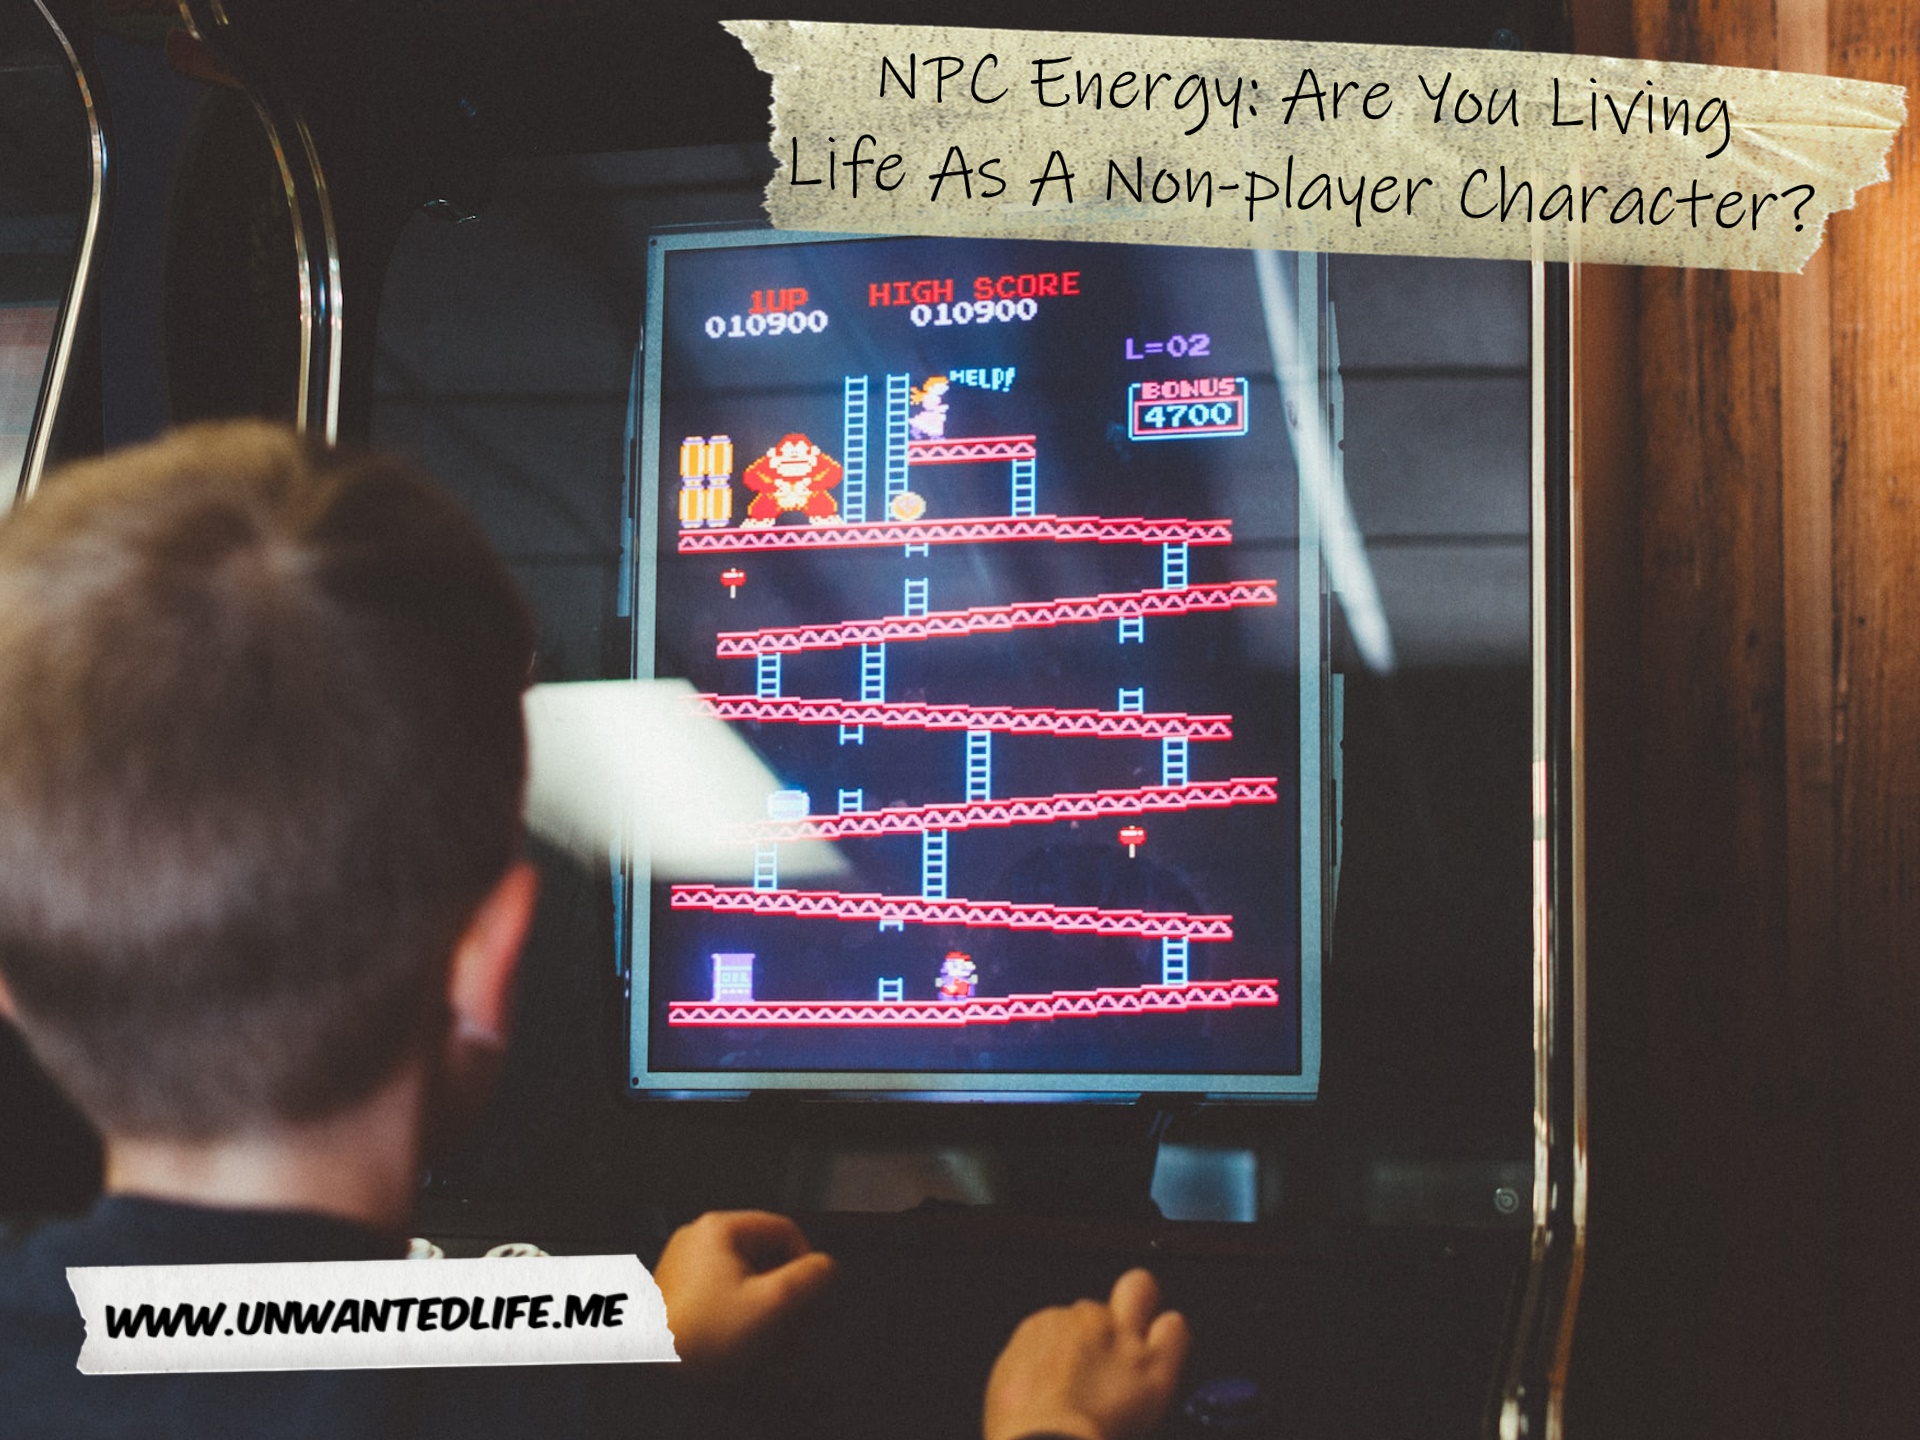 A photo of a young boy playing Donkey Kong on an arcade machine to represent the topic of the article - NPC Energy: Are You Living Life As A Non-player Character?